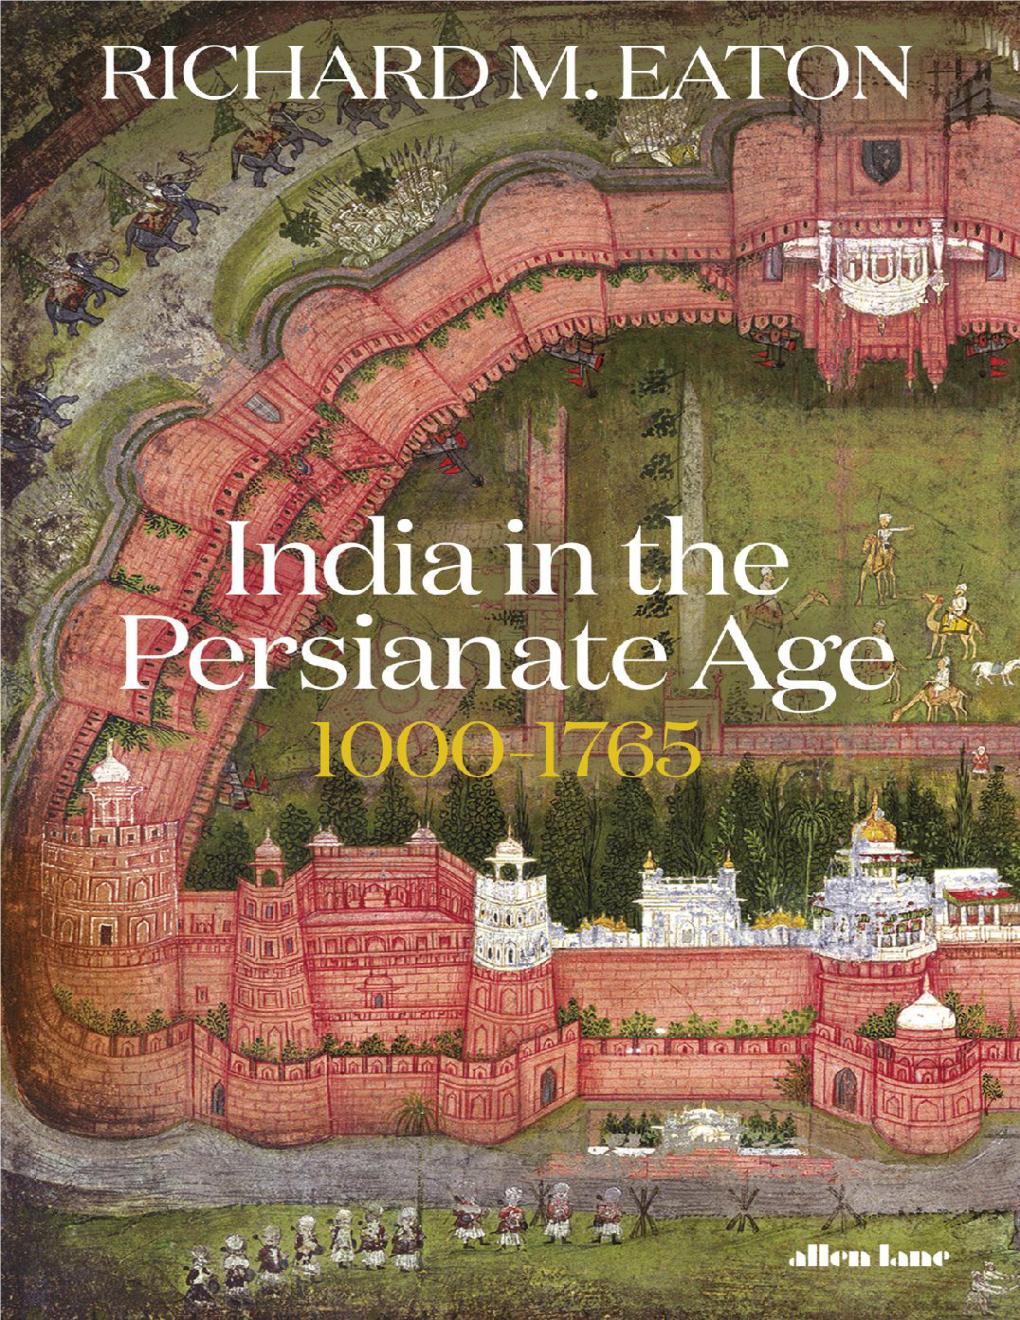 India in the Persianate World the Mughals in the Sanskrit World the Lotus and the Lion Towards Modernity Illustrations Notes Index About the Author